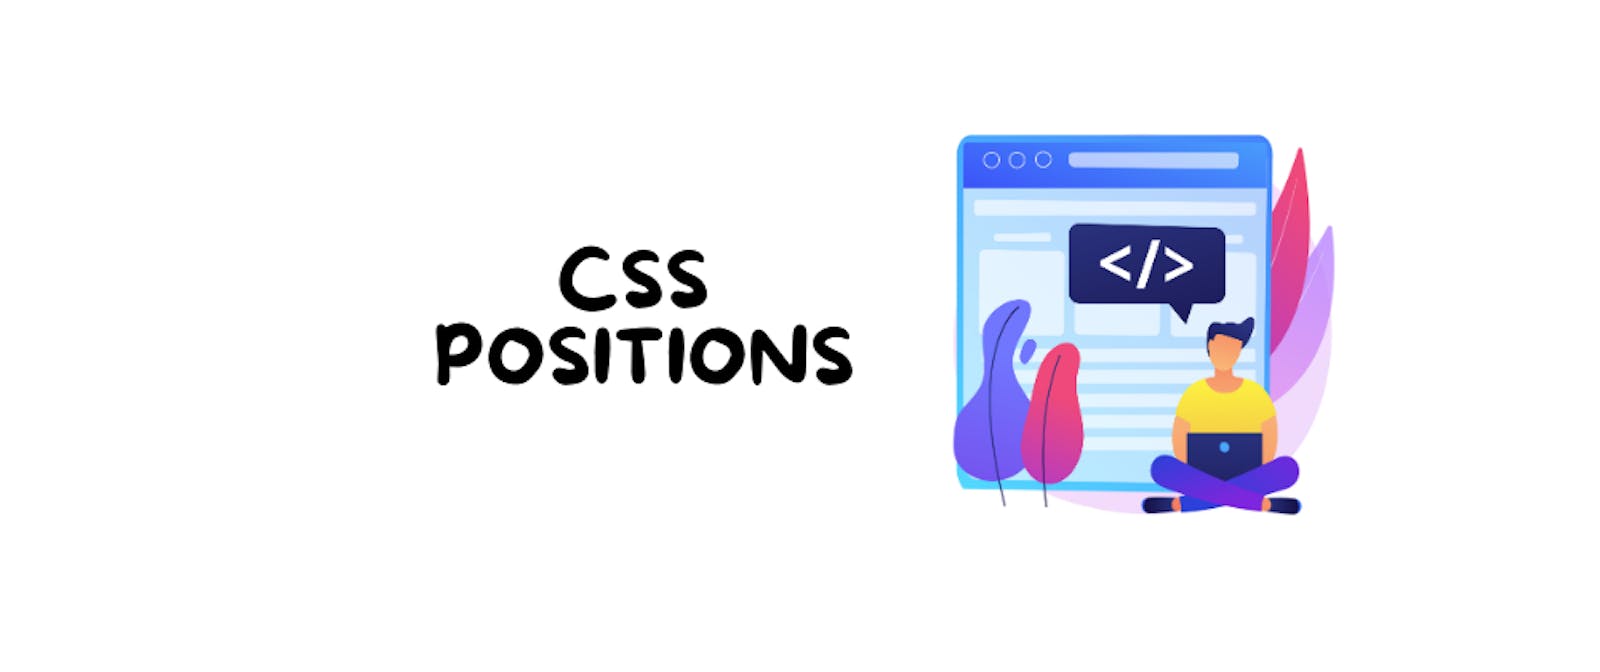 5 Types of CSS Positions For Better Layouts